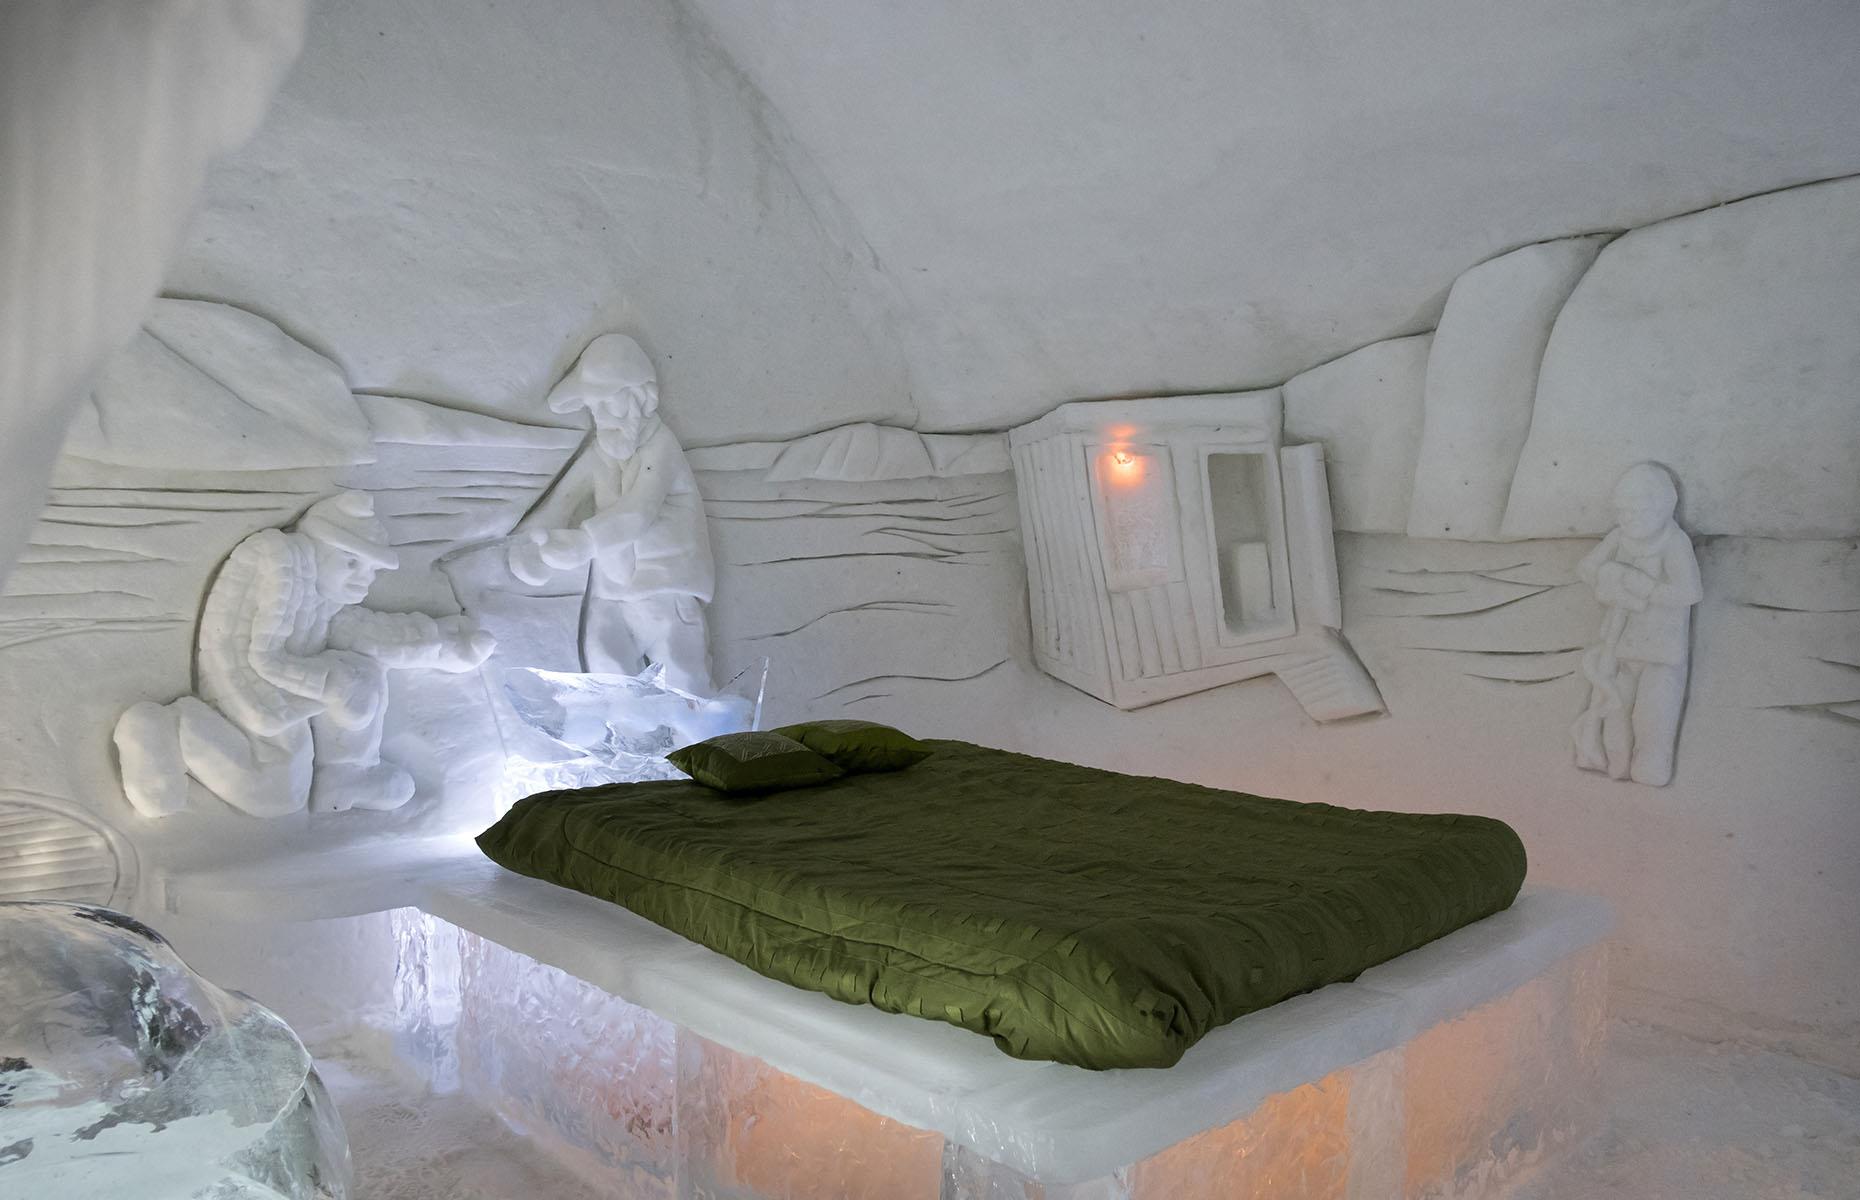 <p>Traveling in winter? You can seek refuge in the spectacular <a href="https://www.valcartier.com/en/lodging/hotel-de-glace-ice-hotel/">Hotel de Glace</a>, a luxurious hotel made entirely of ice, just north of Québec City. It takes 60 people 45 days to build and only lasts from January until March.</p>  <p>The next day, refuel at Trois-Pistoles, where you can pick up freshly made bread, pastries, and cheese at locally-renowned Fromagerie des Basques.</p>